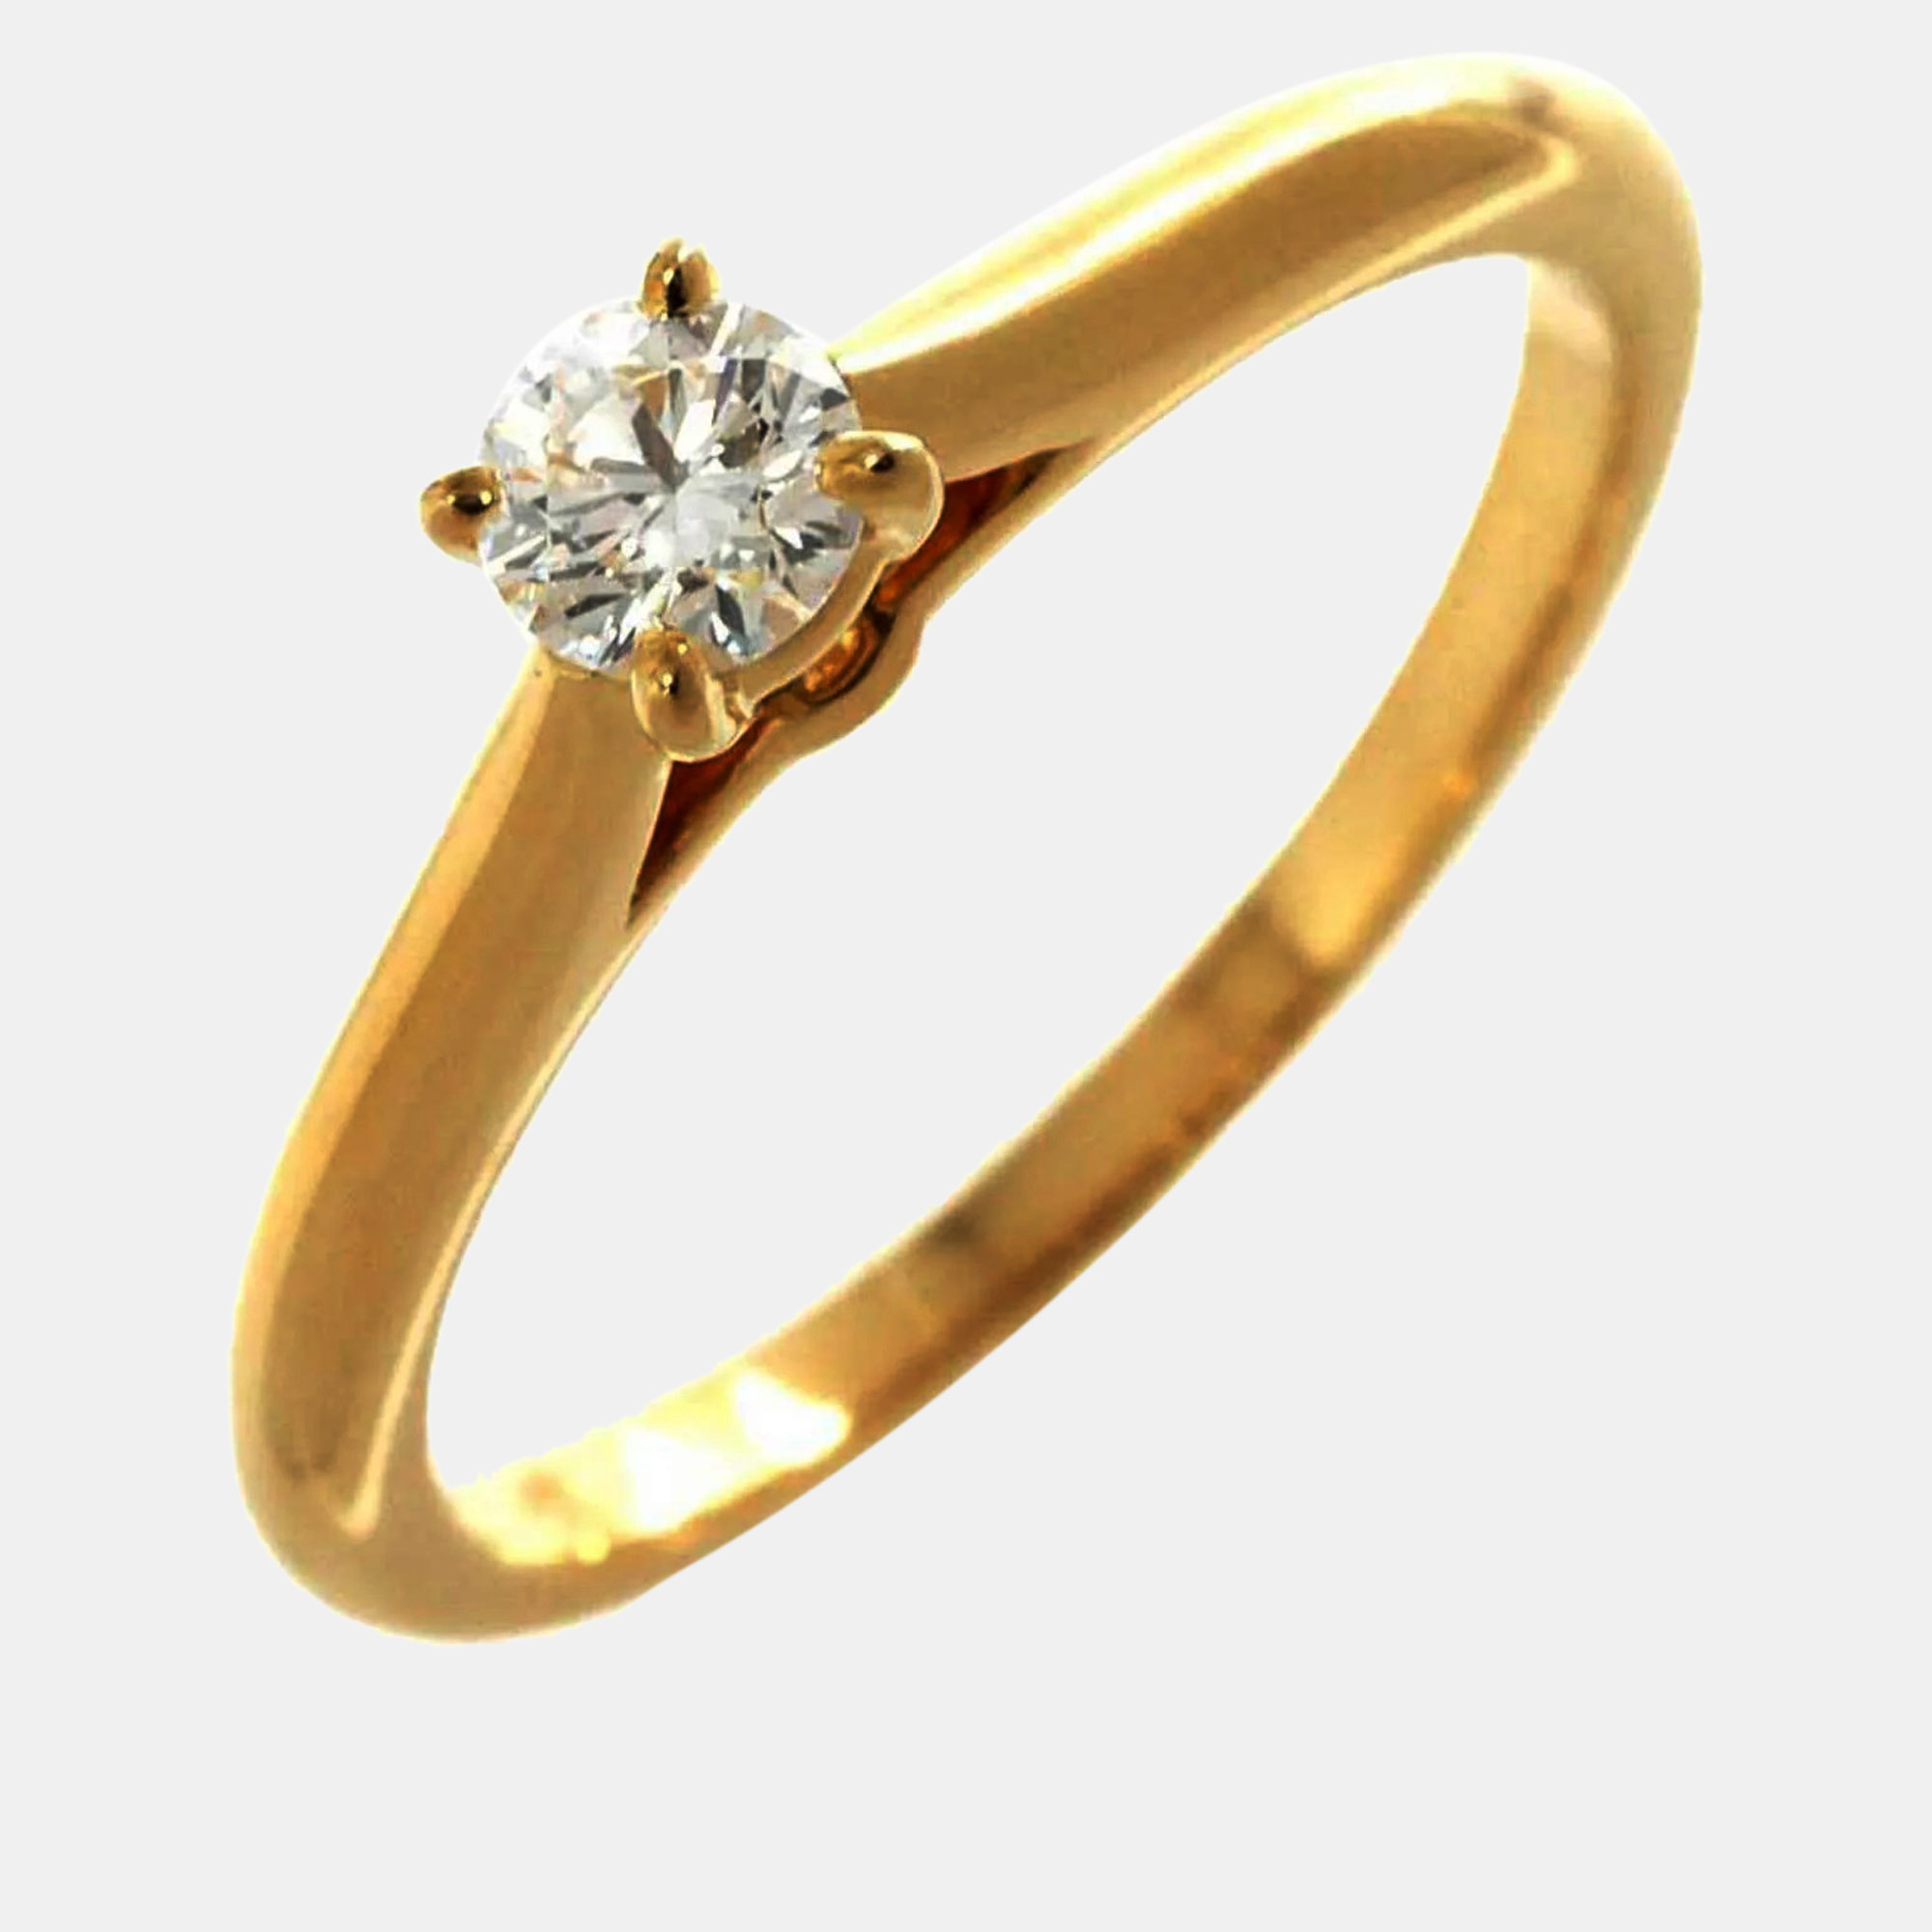 A symbol of artisanal mastery this Cartier ring seamlessly integrates into your everyday and special occasions enhancing any outfit with opulence. Crafted with precision and passion it guarantees to remain a cherished heirloom.